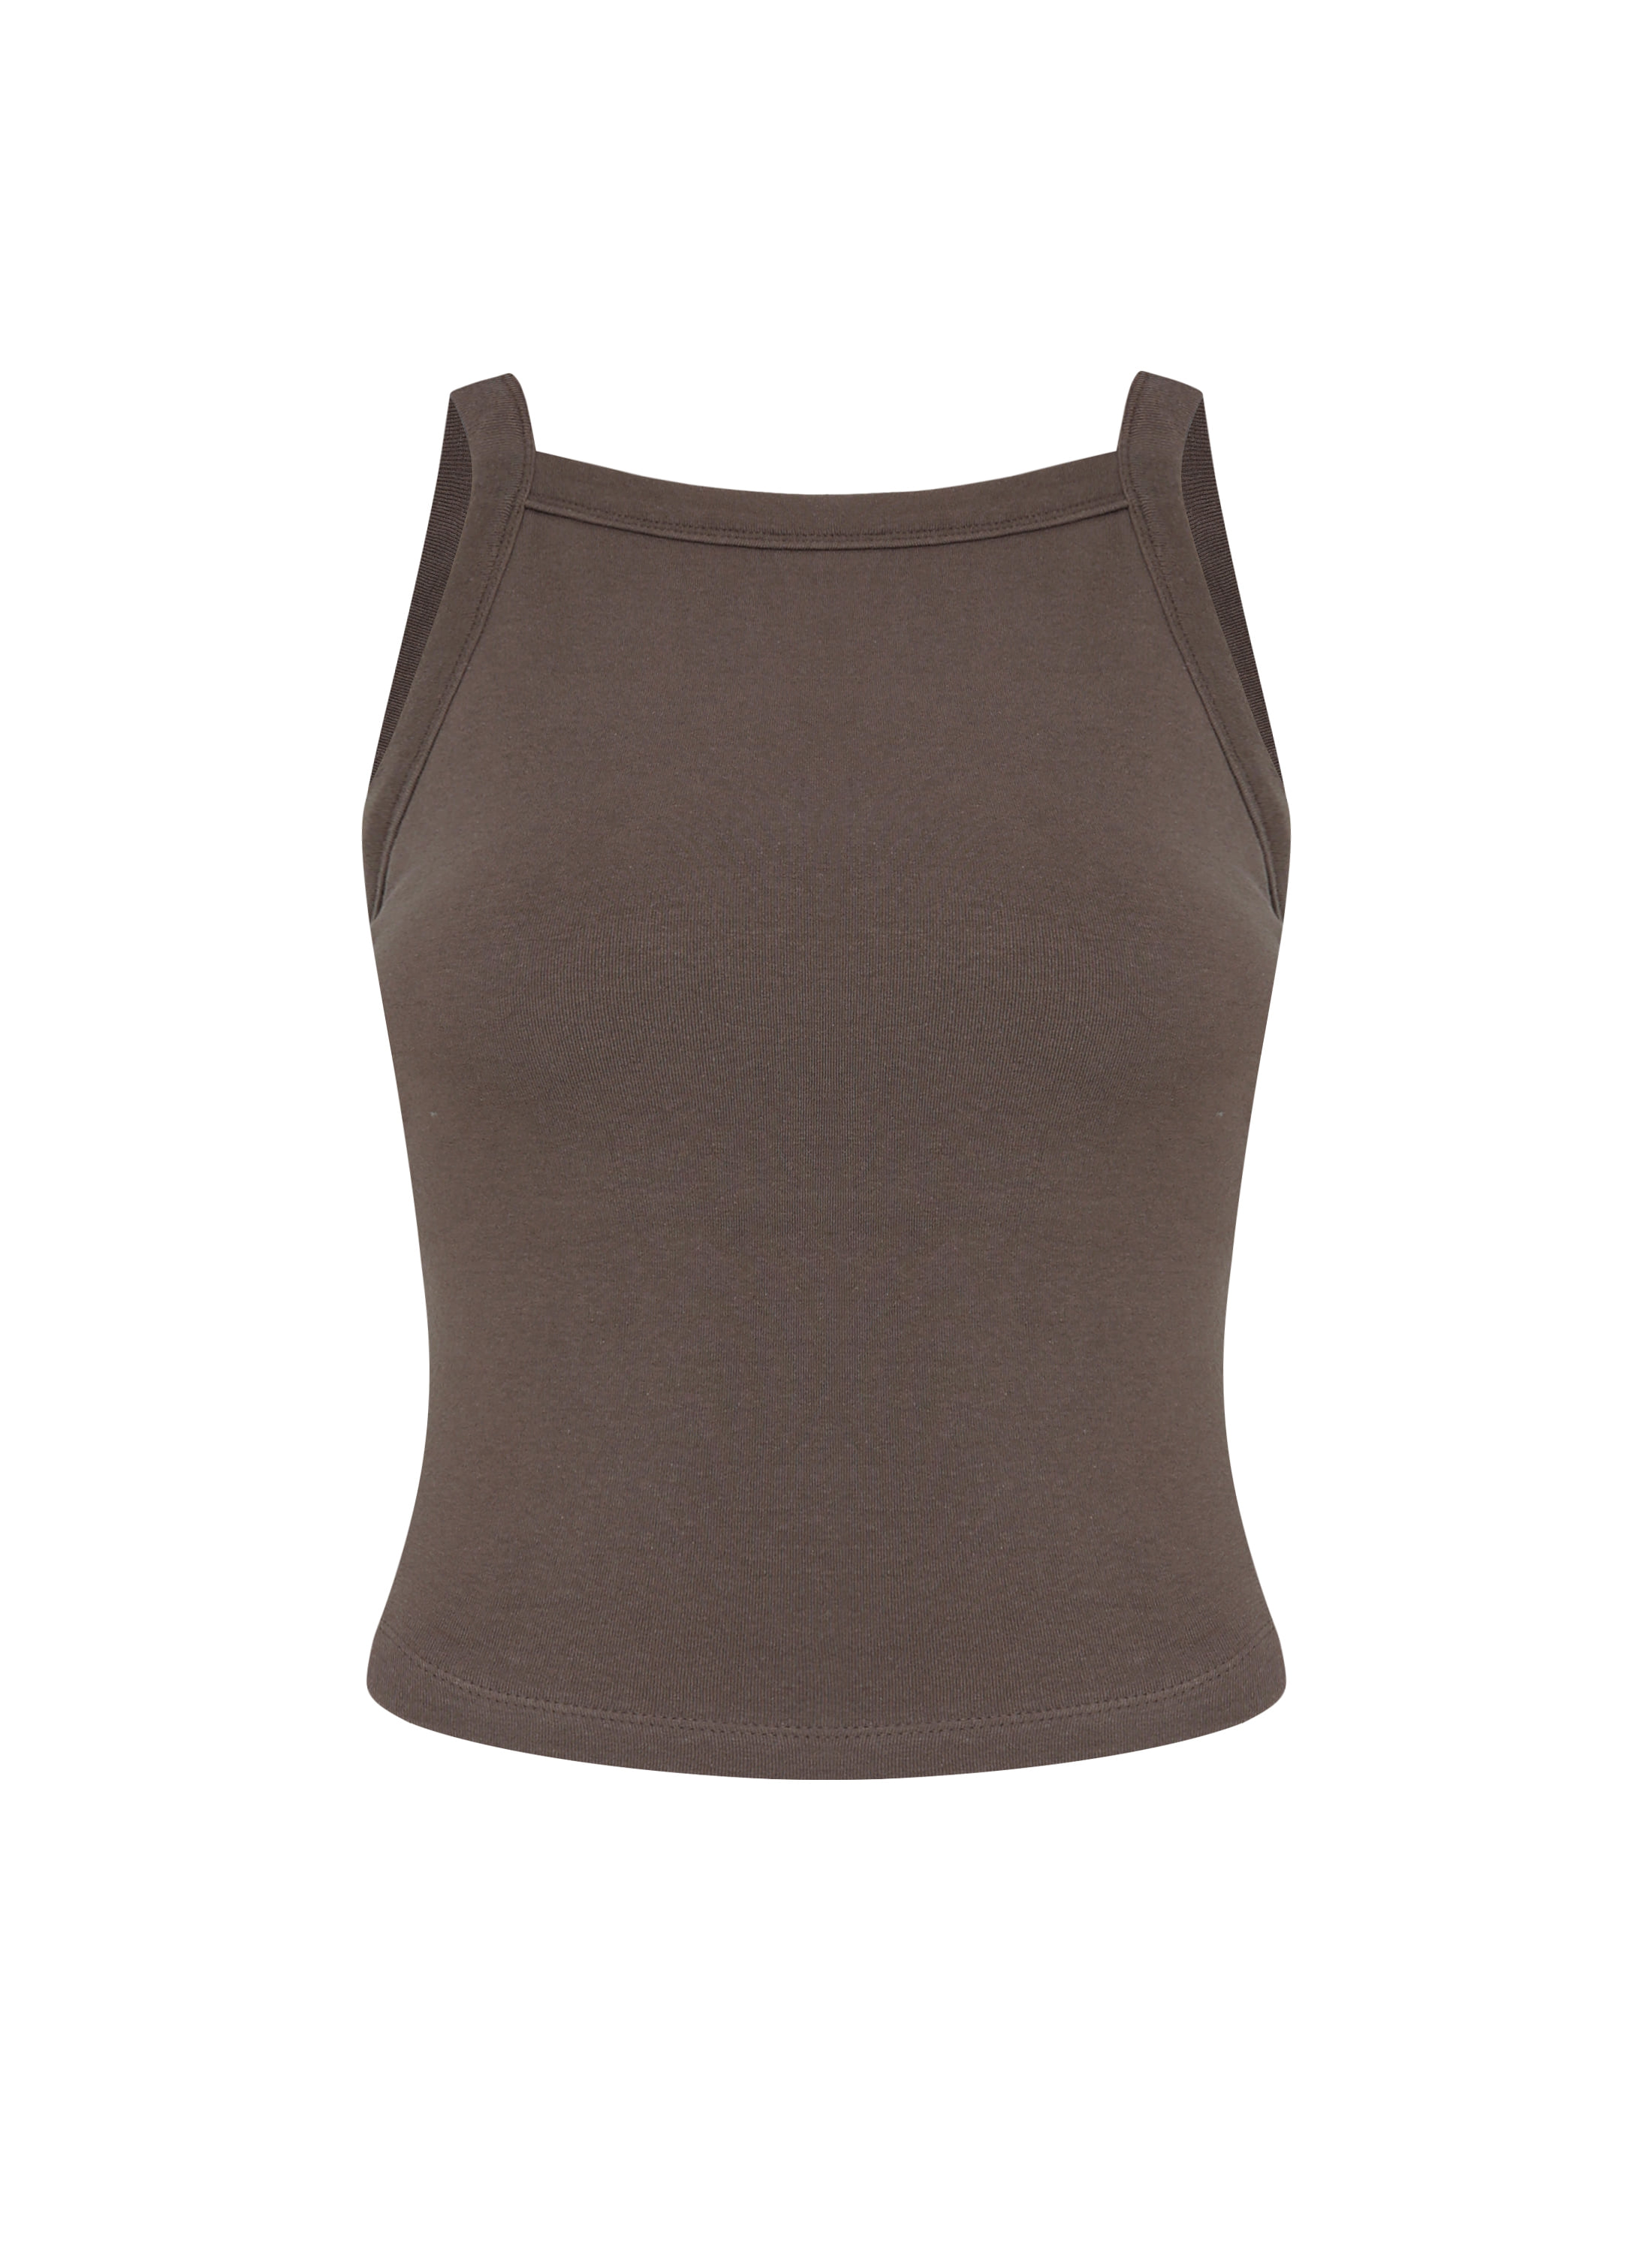 PAD BACKLESS TOP BROWN 바이스어치브유쓰